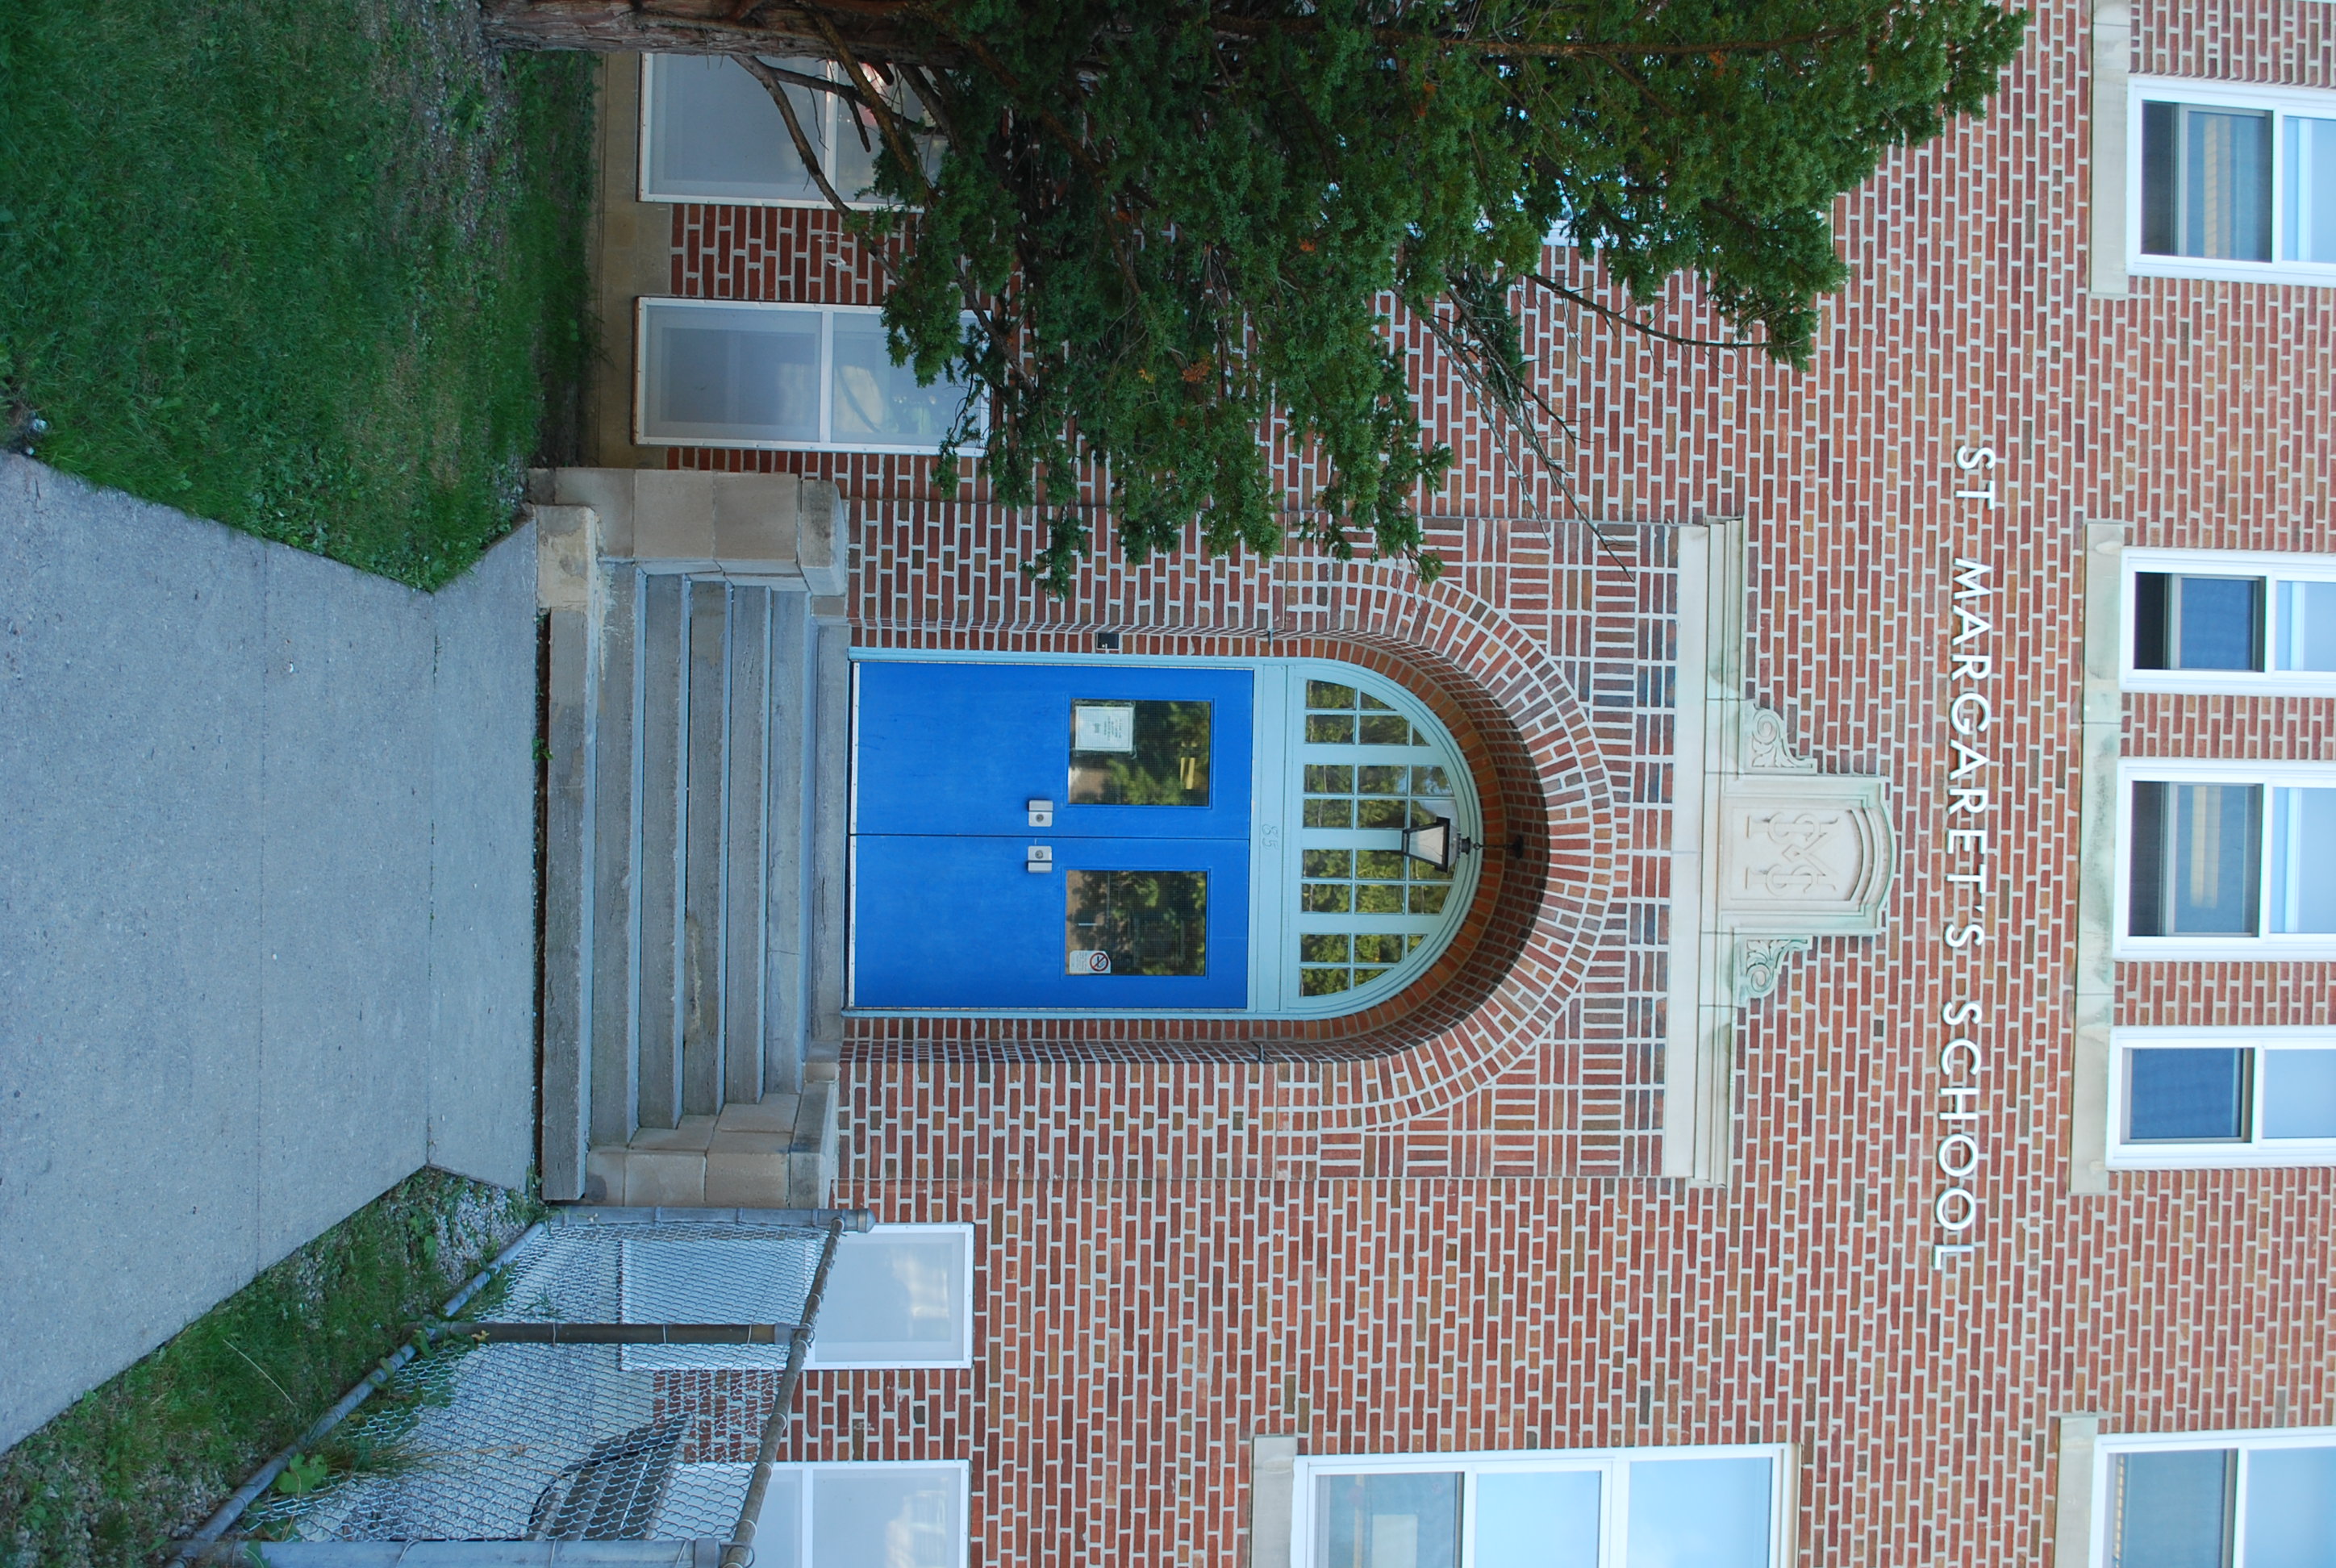 The front of the St. Margaret Catholic School building